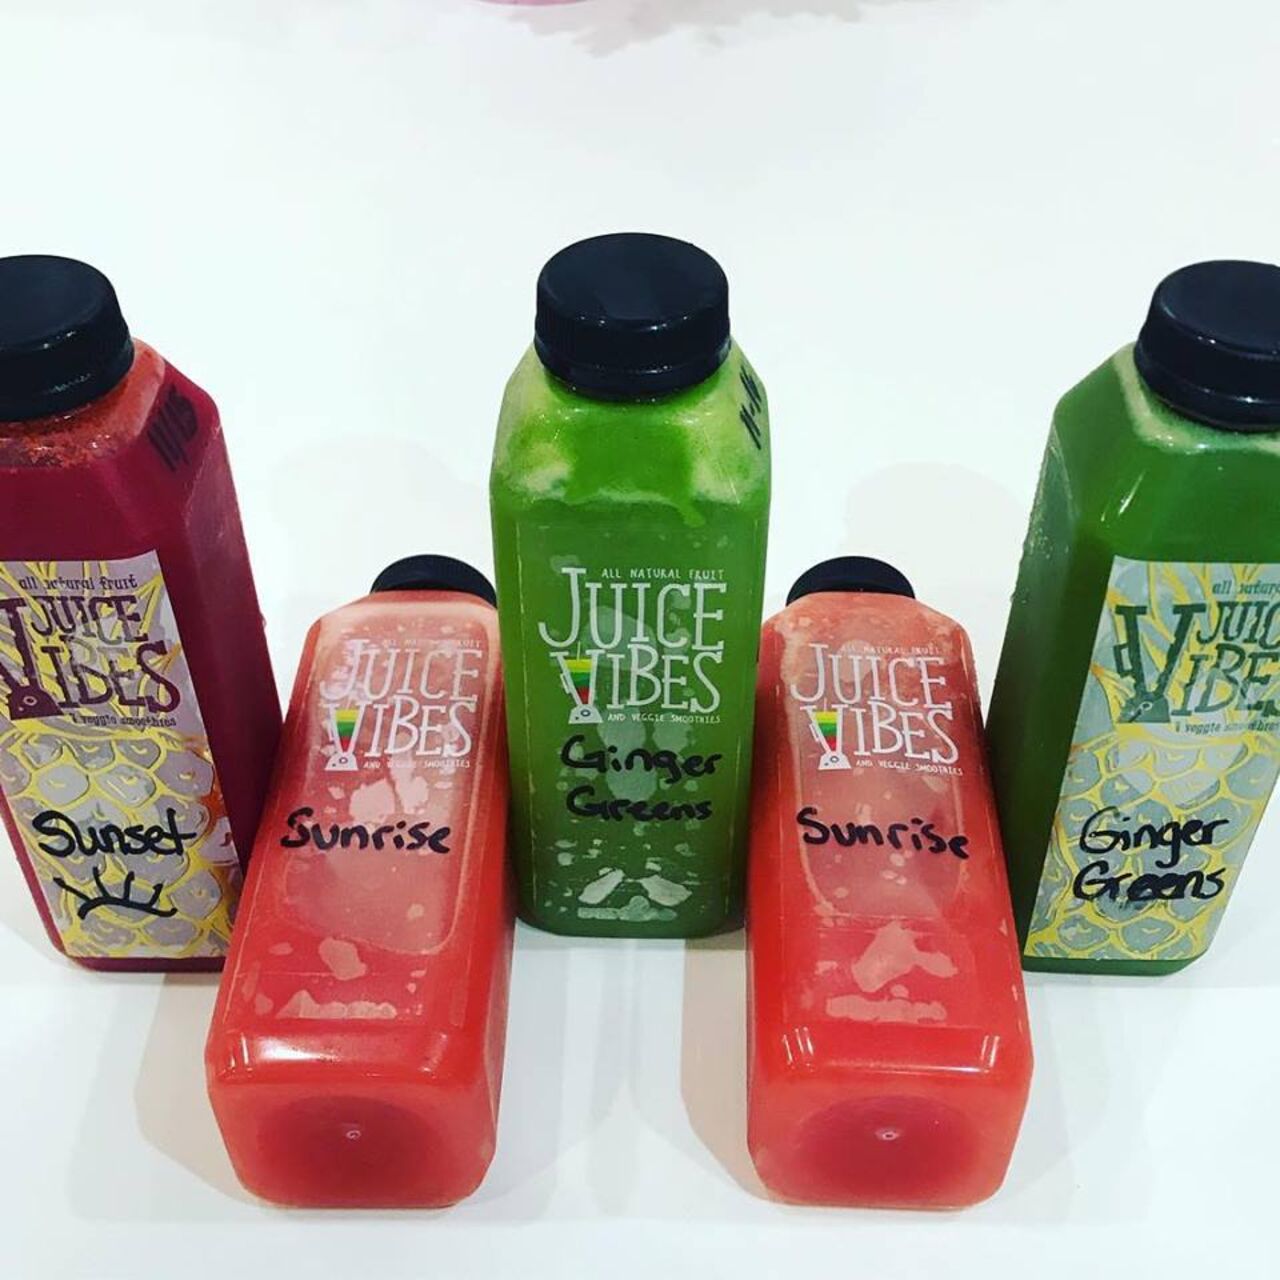 A photo of JuiceVibes